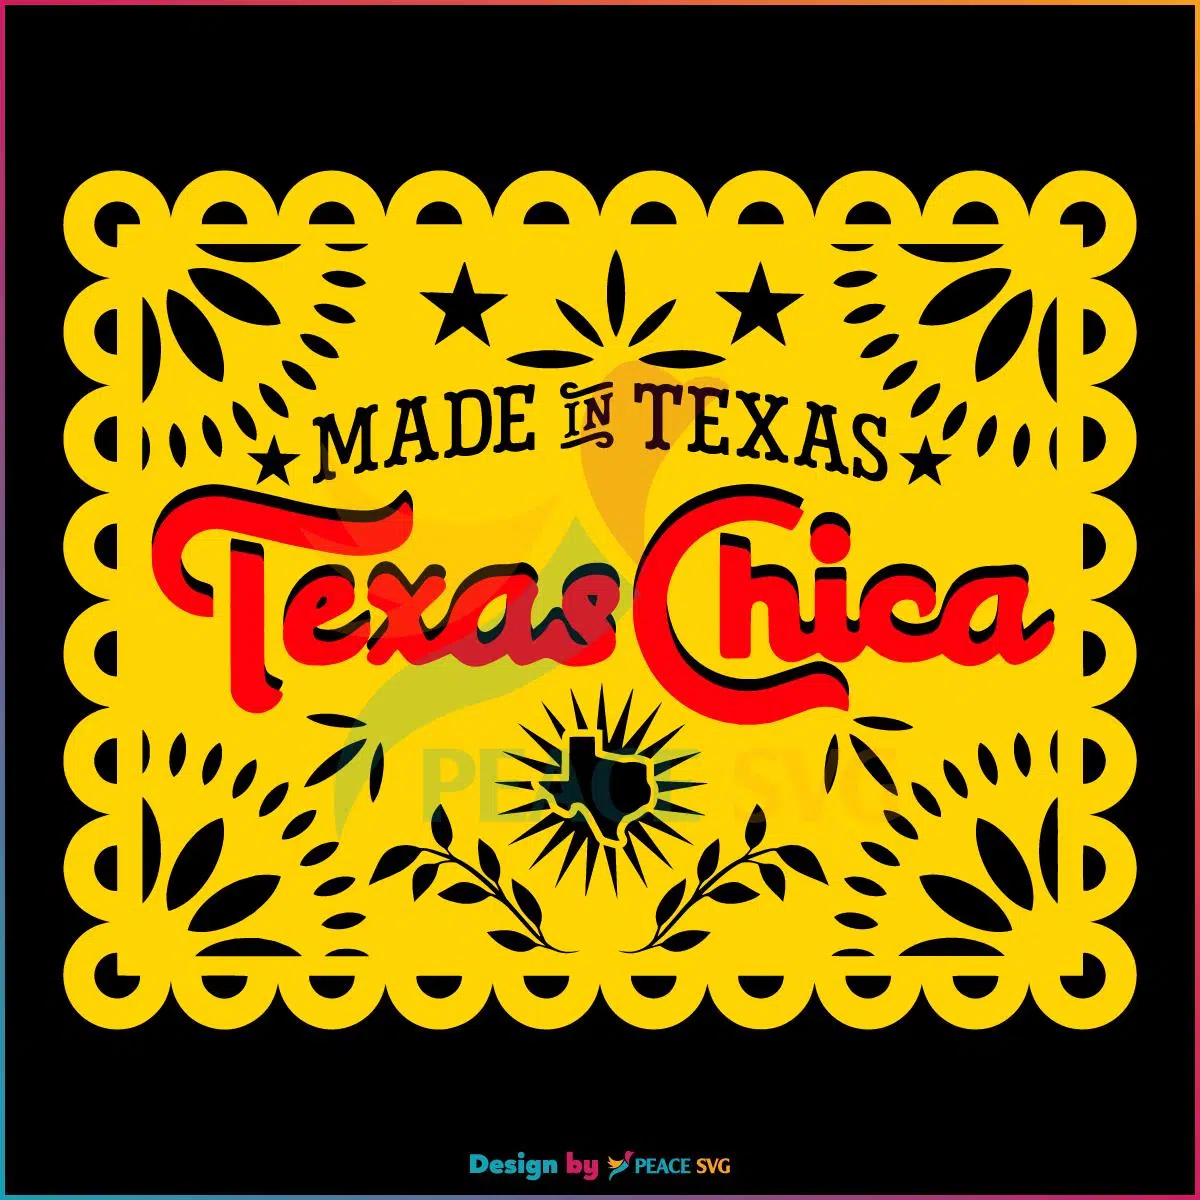 Made In Texas Texas Chica Papel Picado SVG Graphic Designs Files